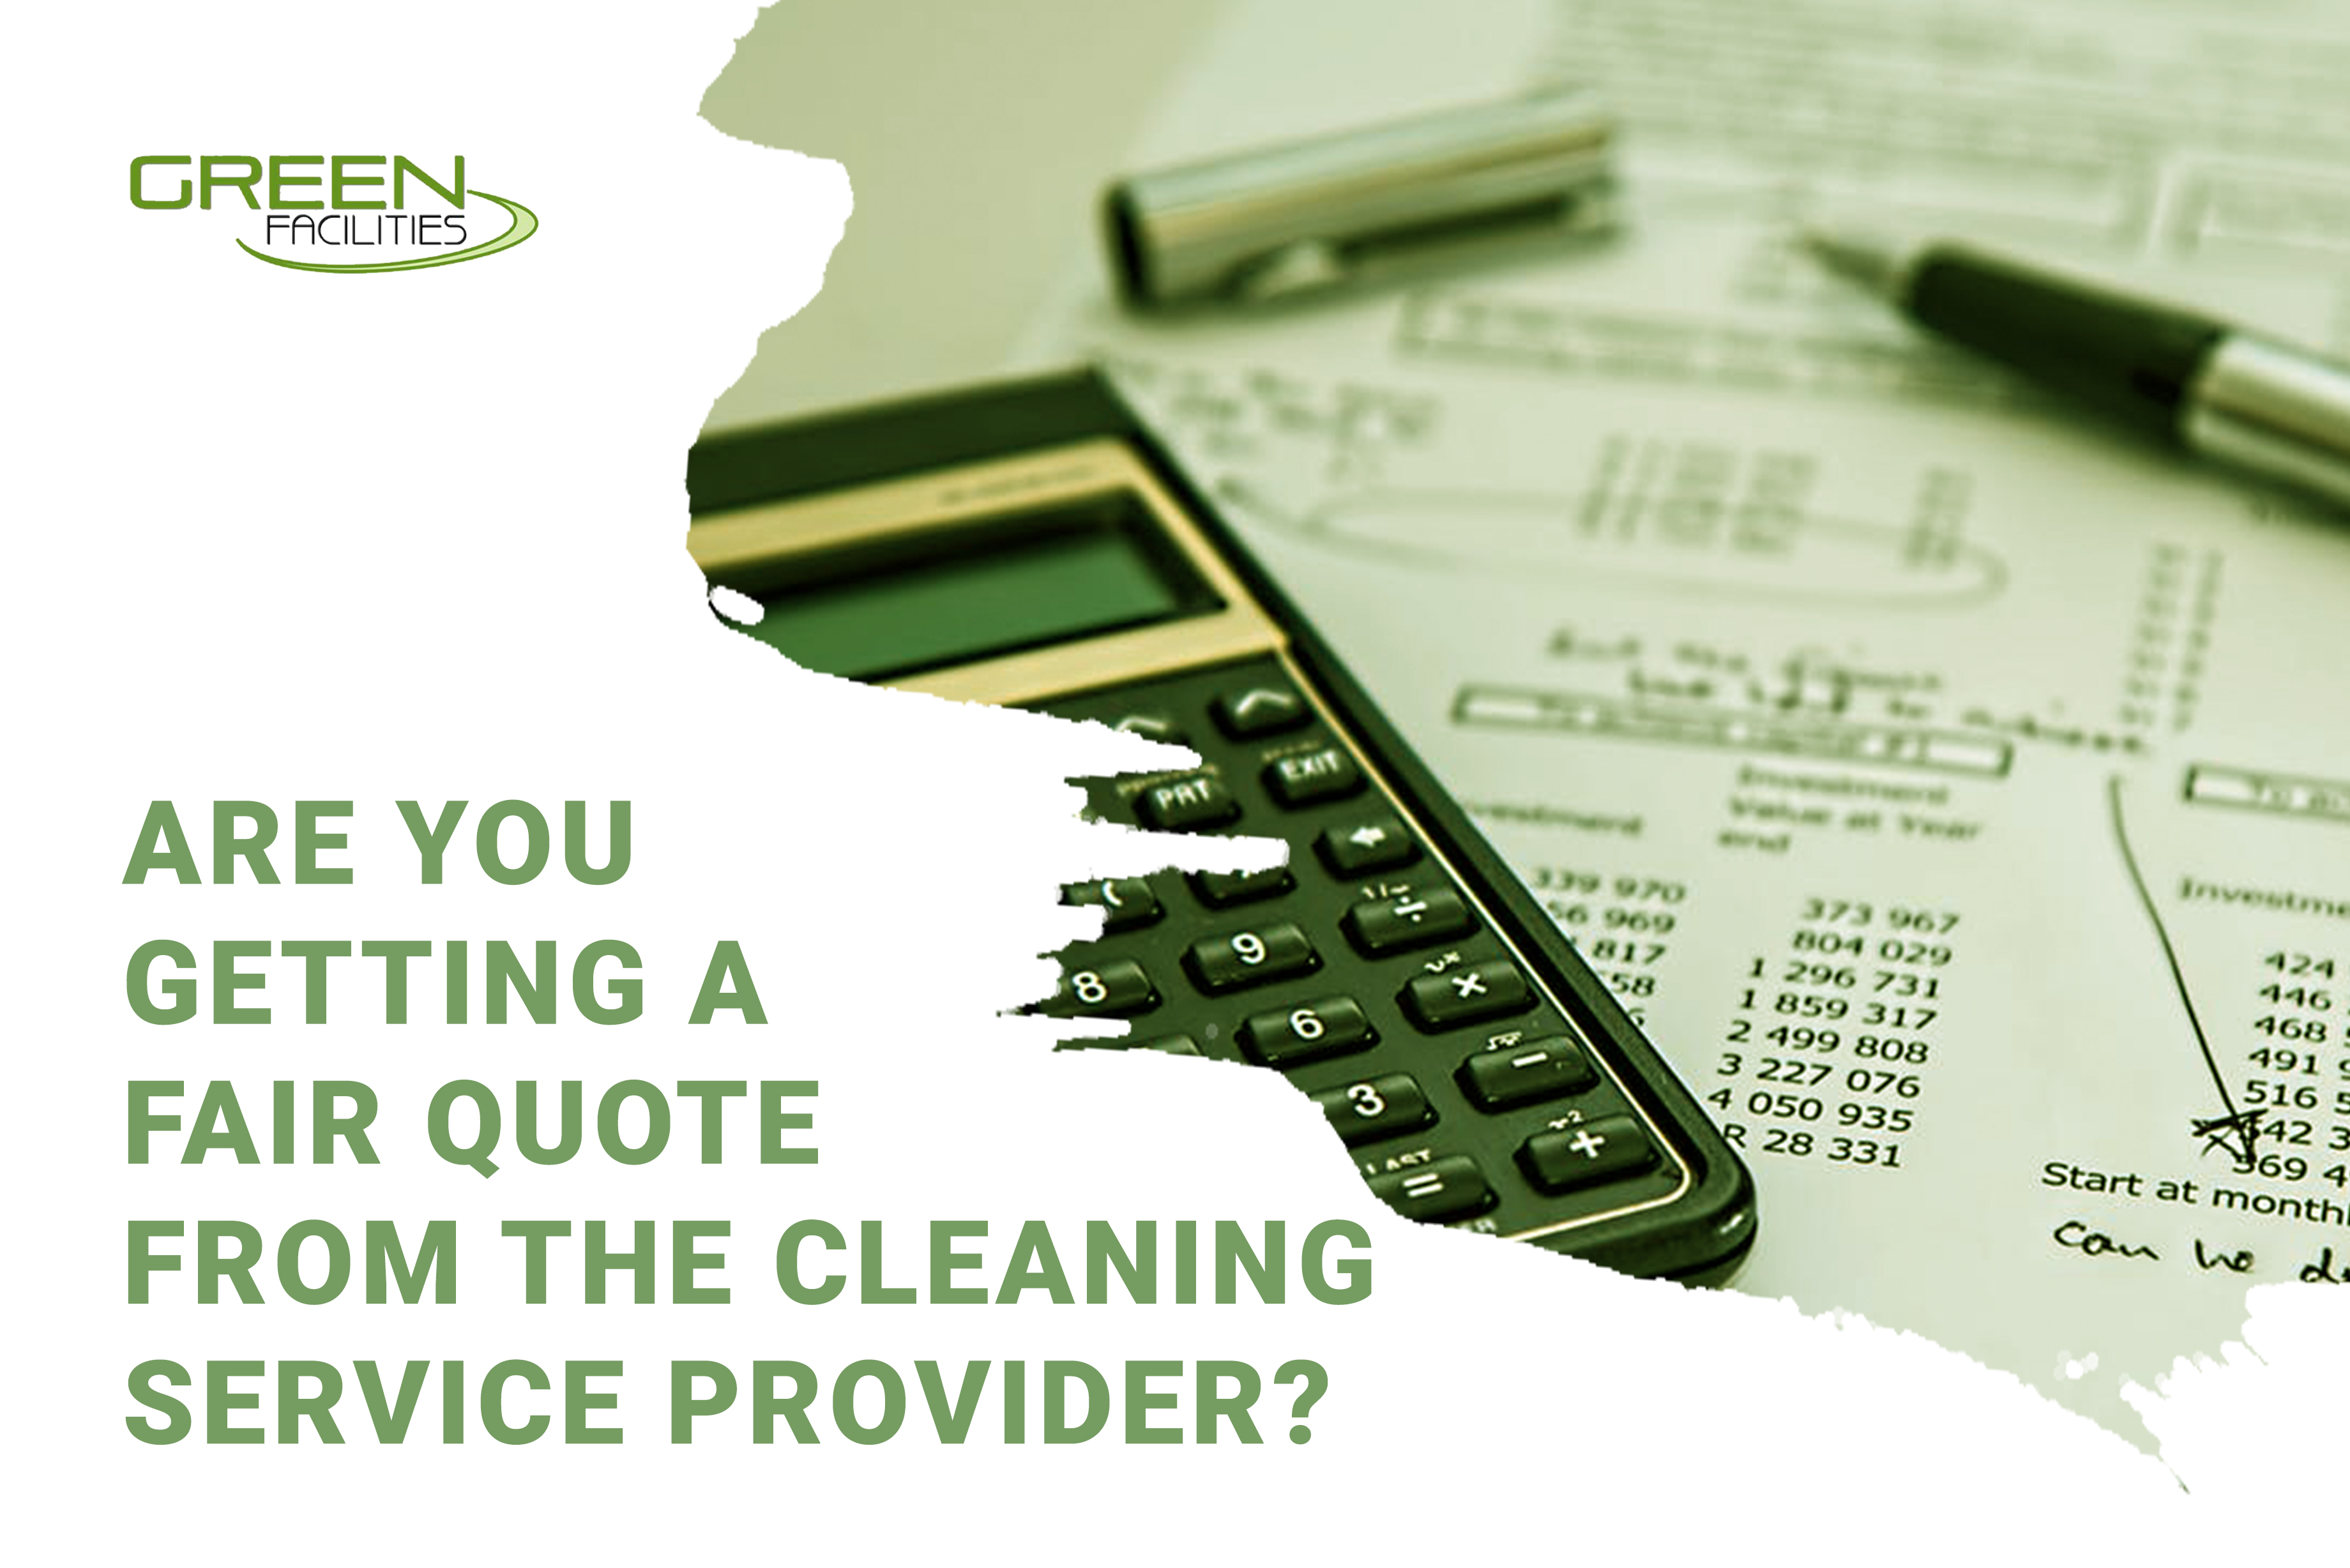 Are You Getting a Fair Quote from the Cleaning Service Provider?